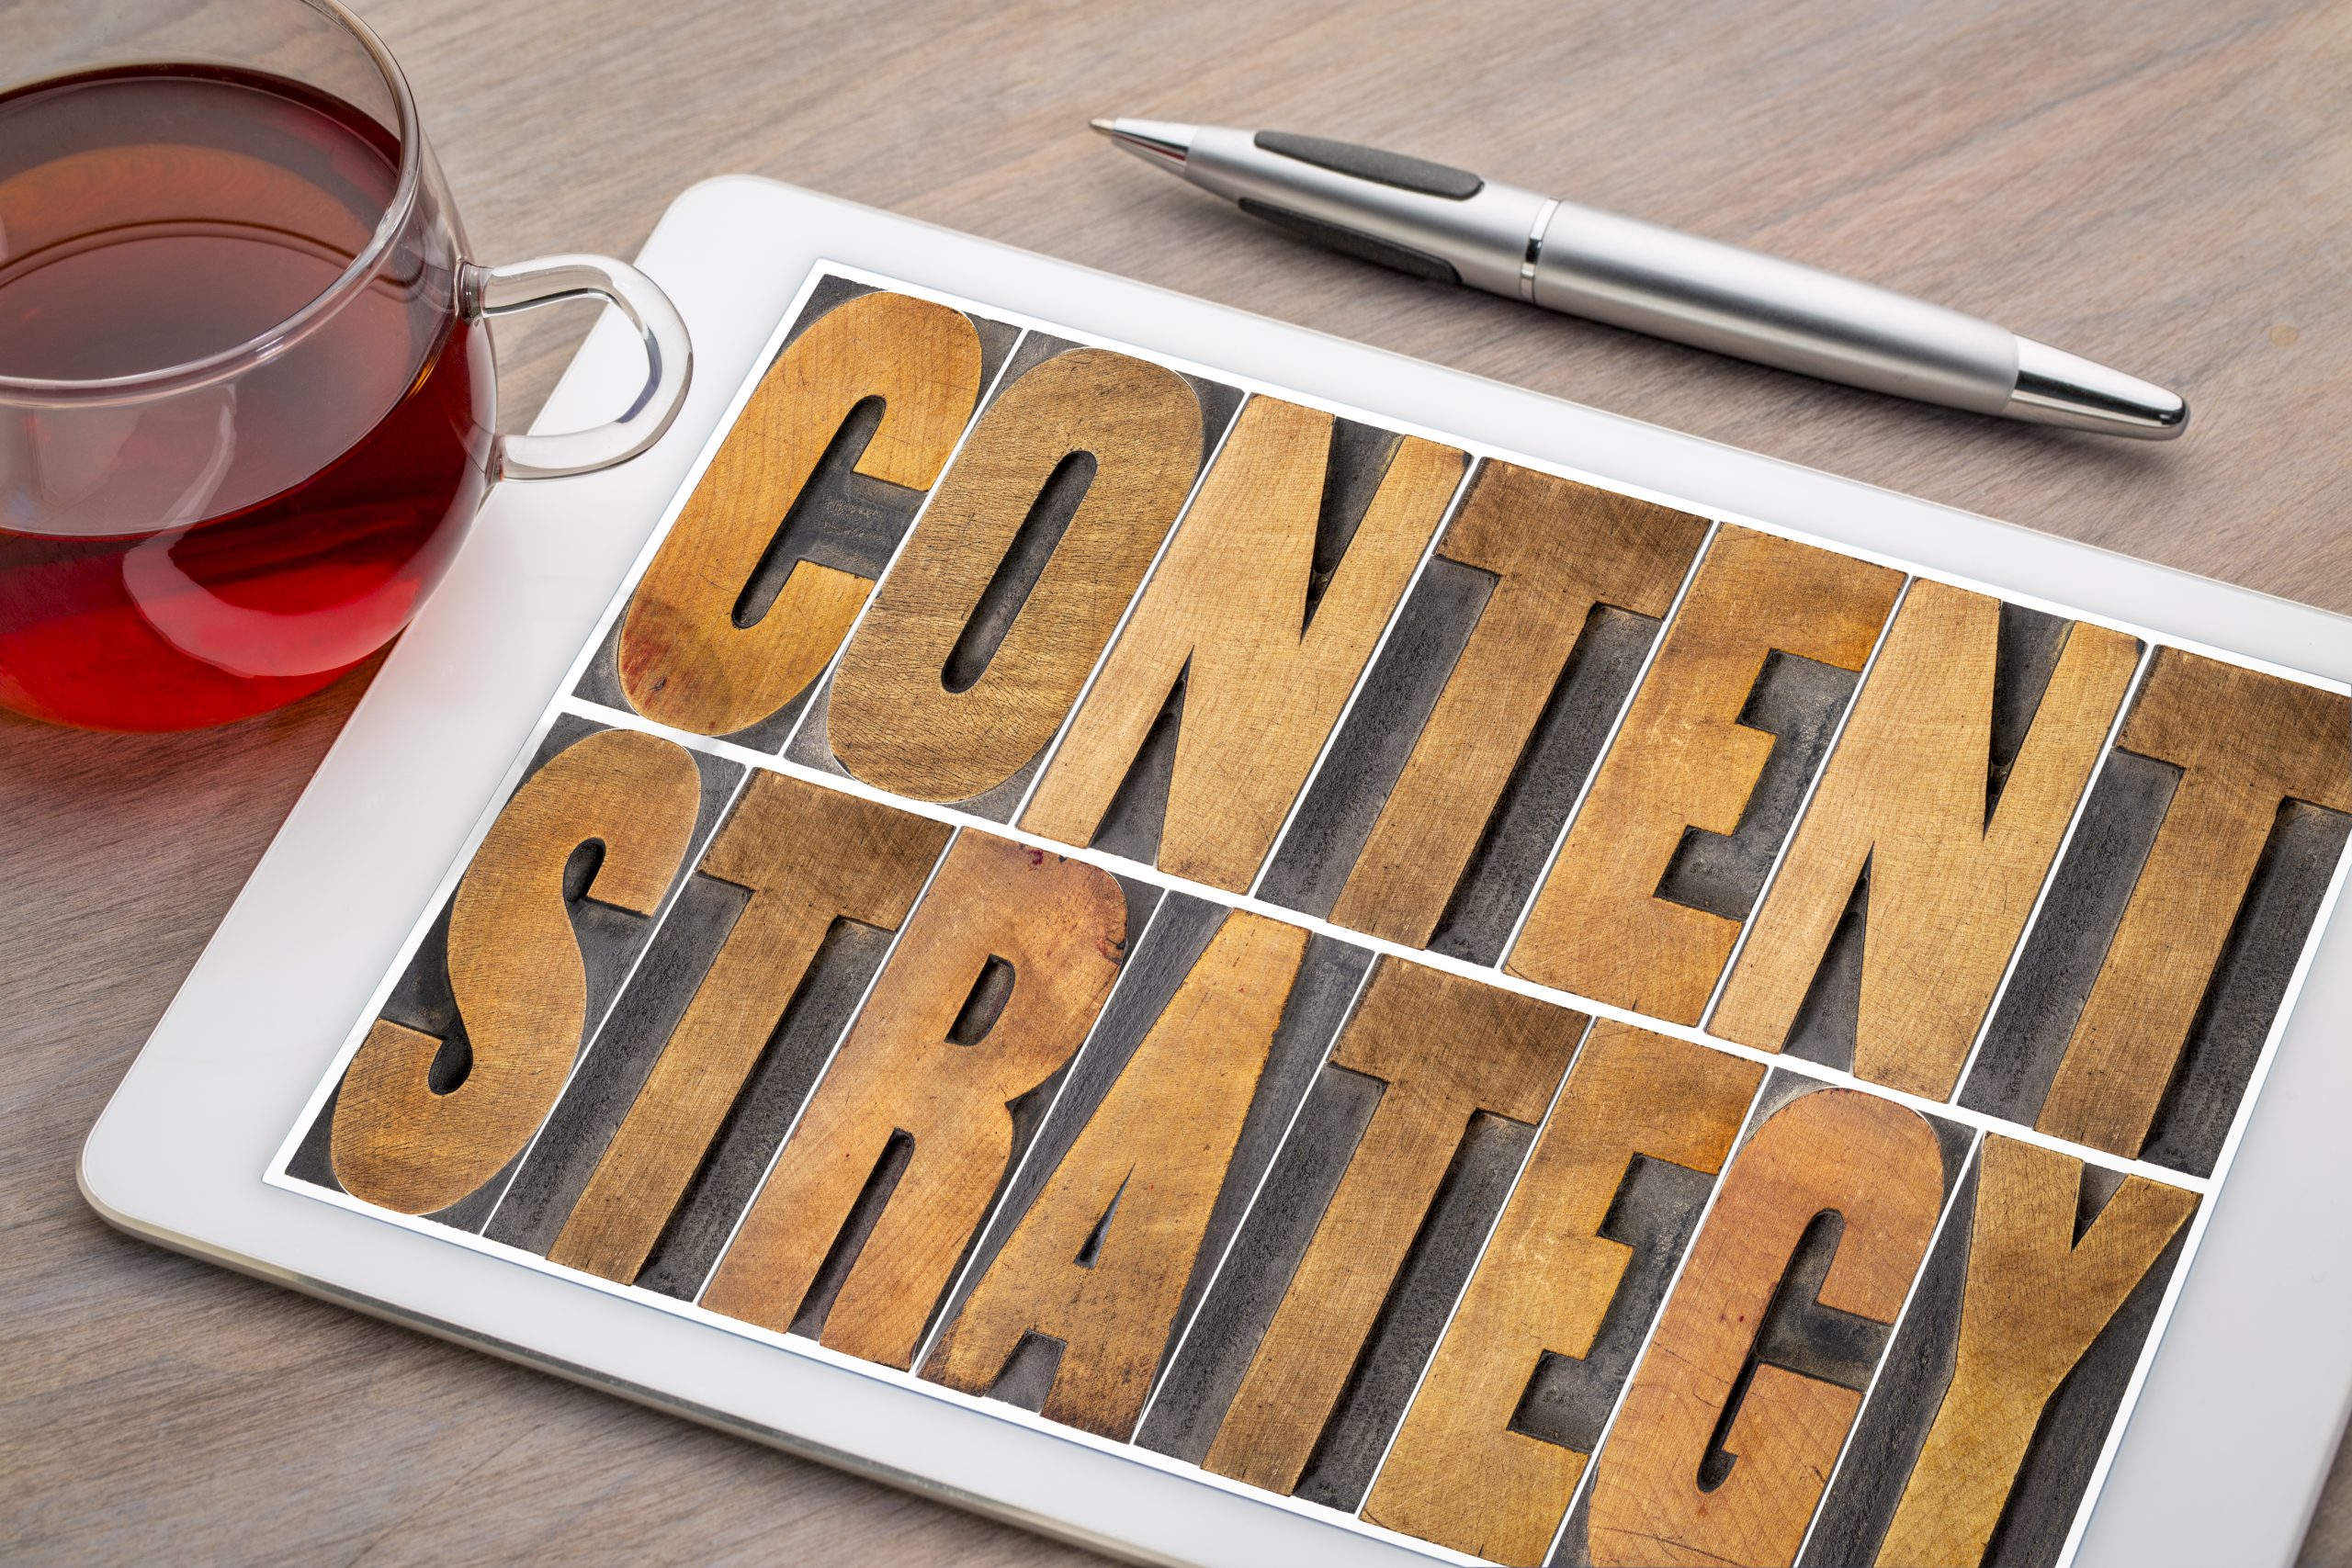 content strategy - word abstract in letterpress wood type printing blocks on a digital tablet with cup of tea